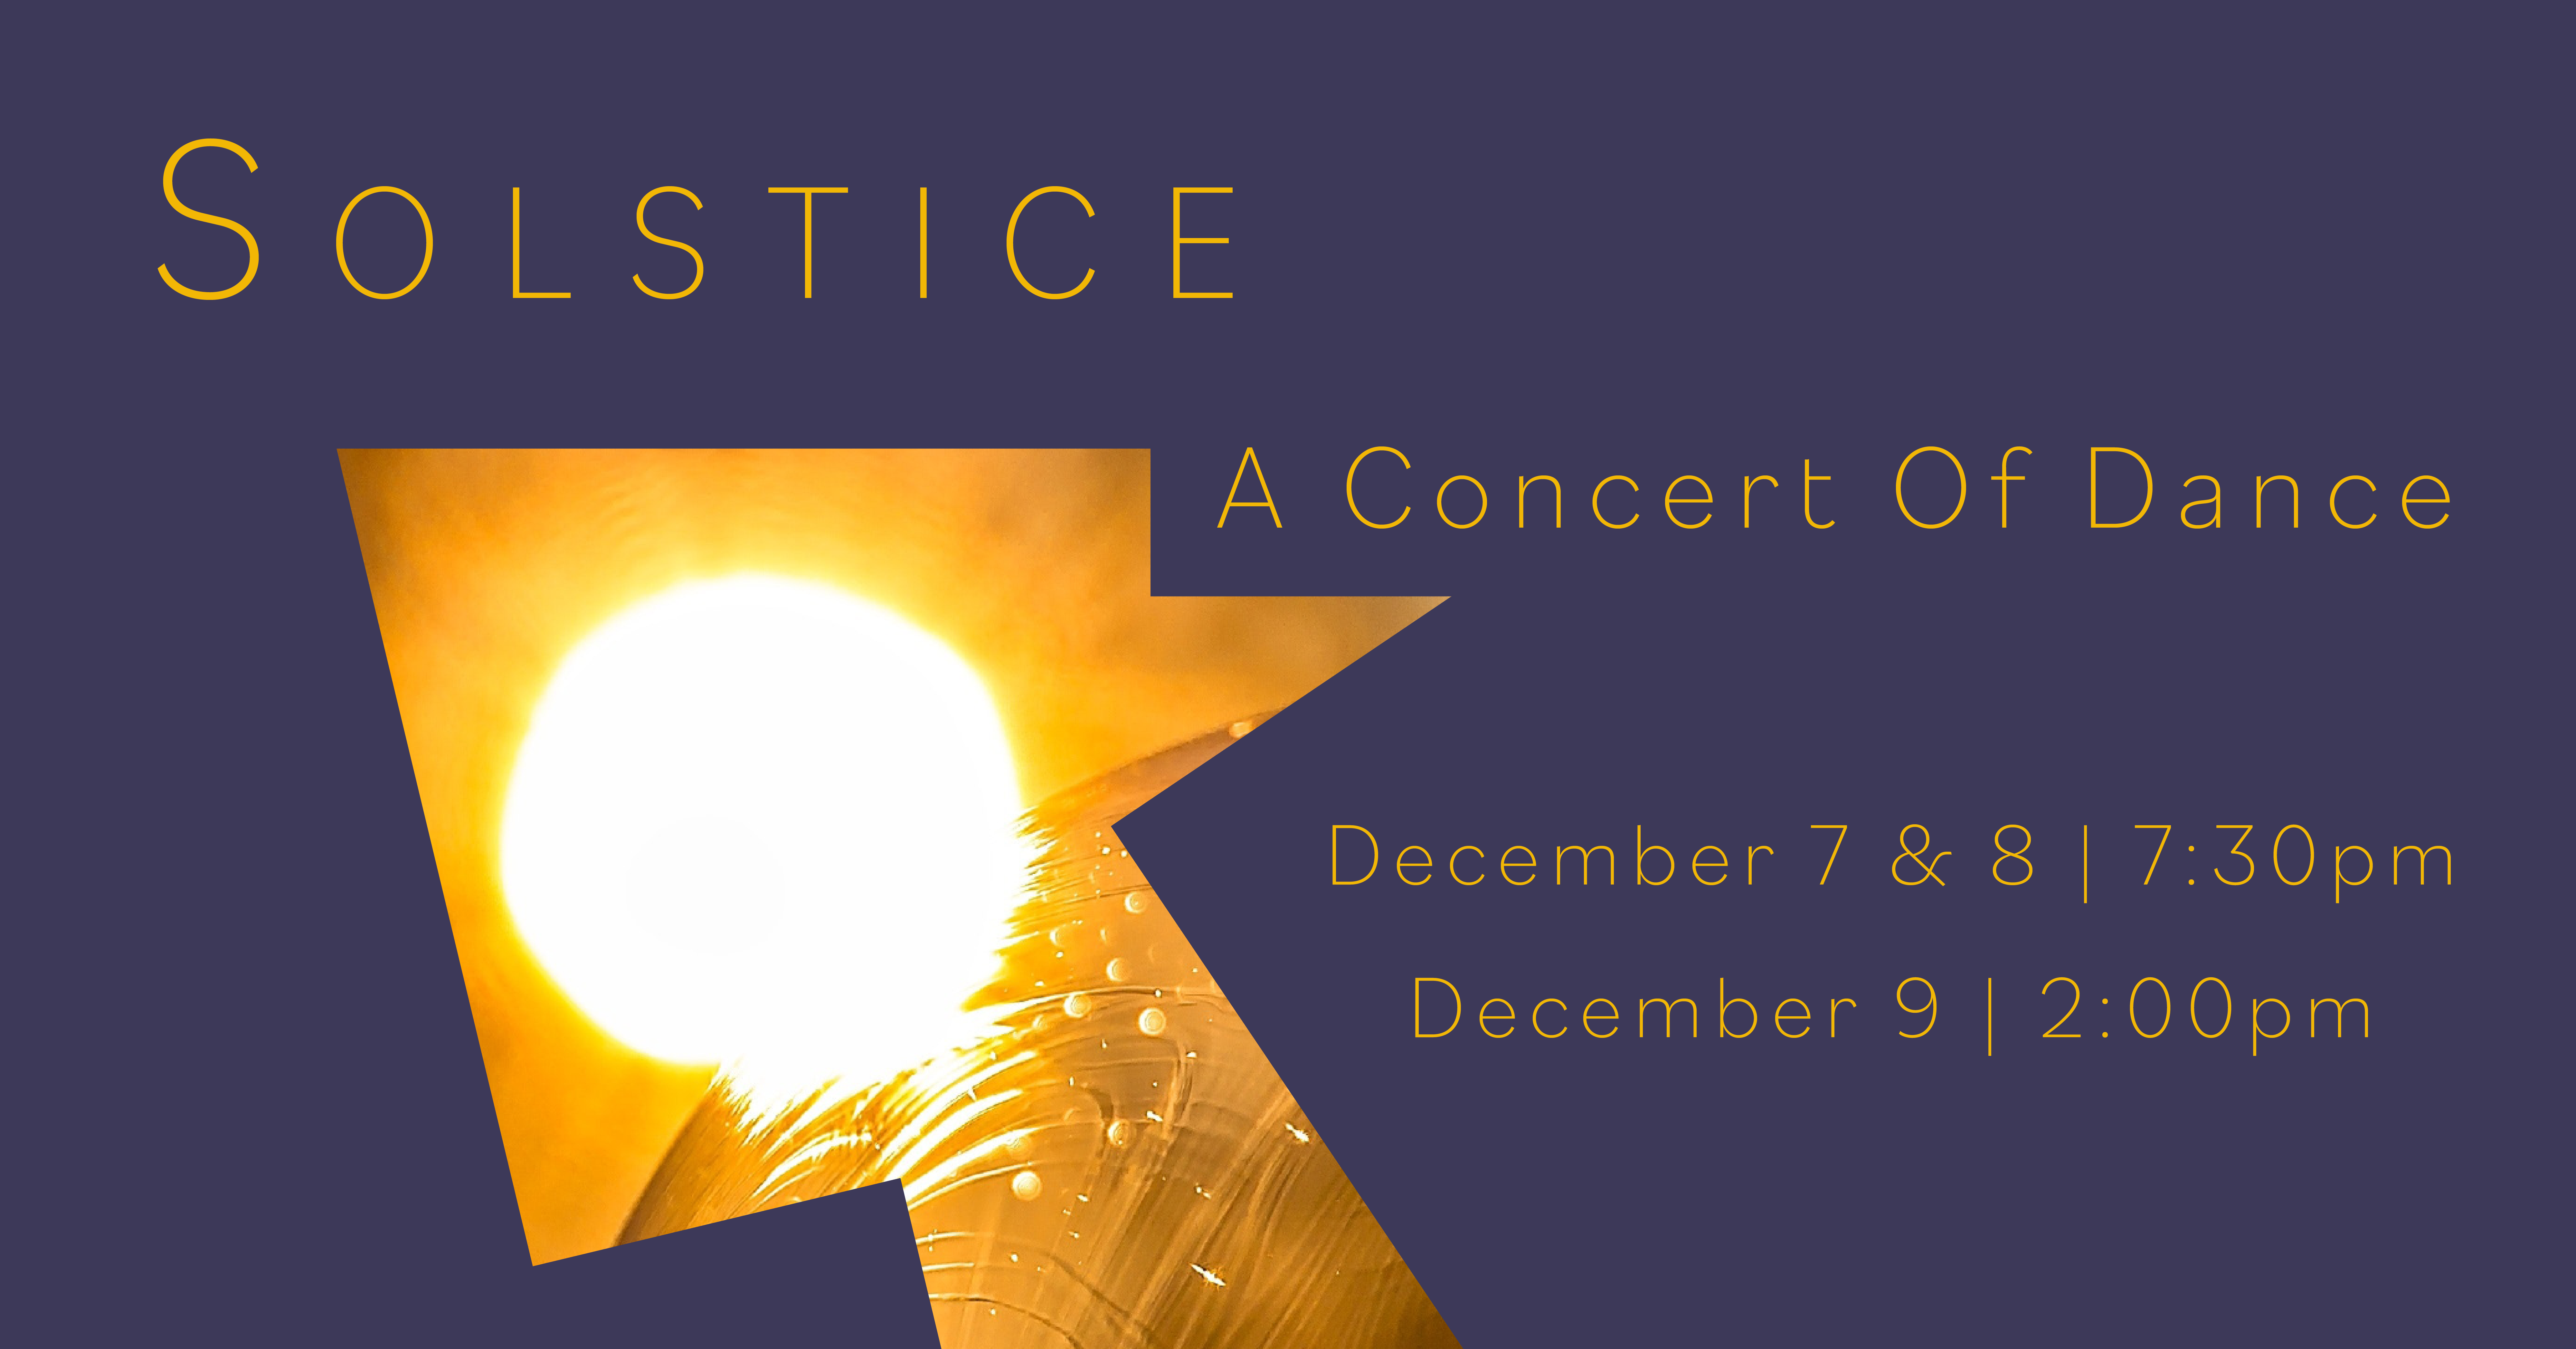 A winter reflection of the sun in ice framed by dark purple geometric cut-outs that say "Solstice, A Concert of Dance, December 7 & 8, 7:30pm, December 9, 2:00pm."